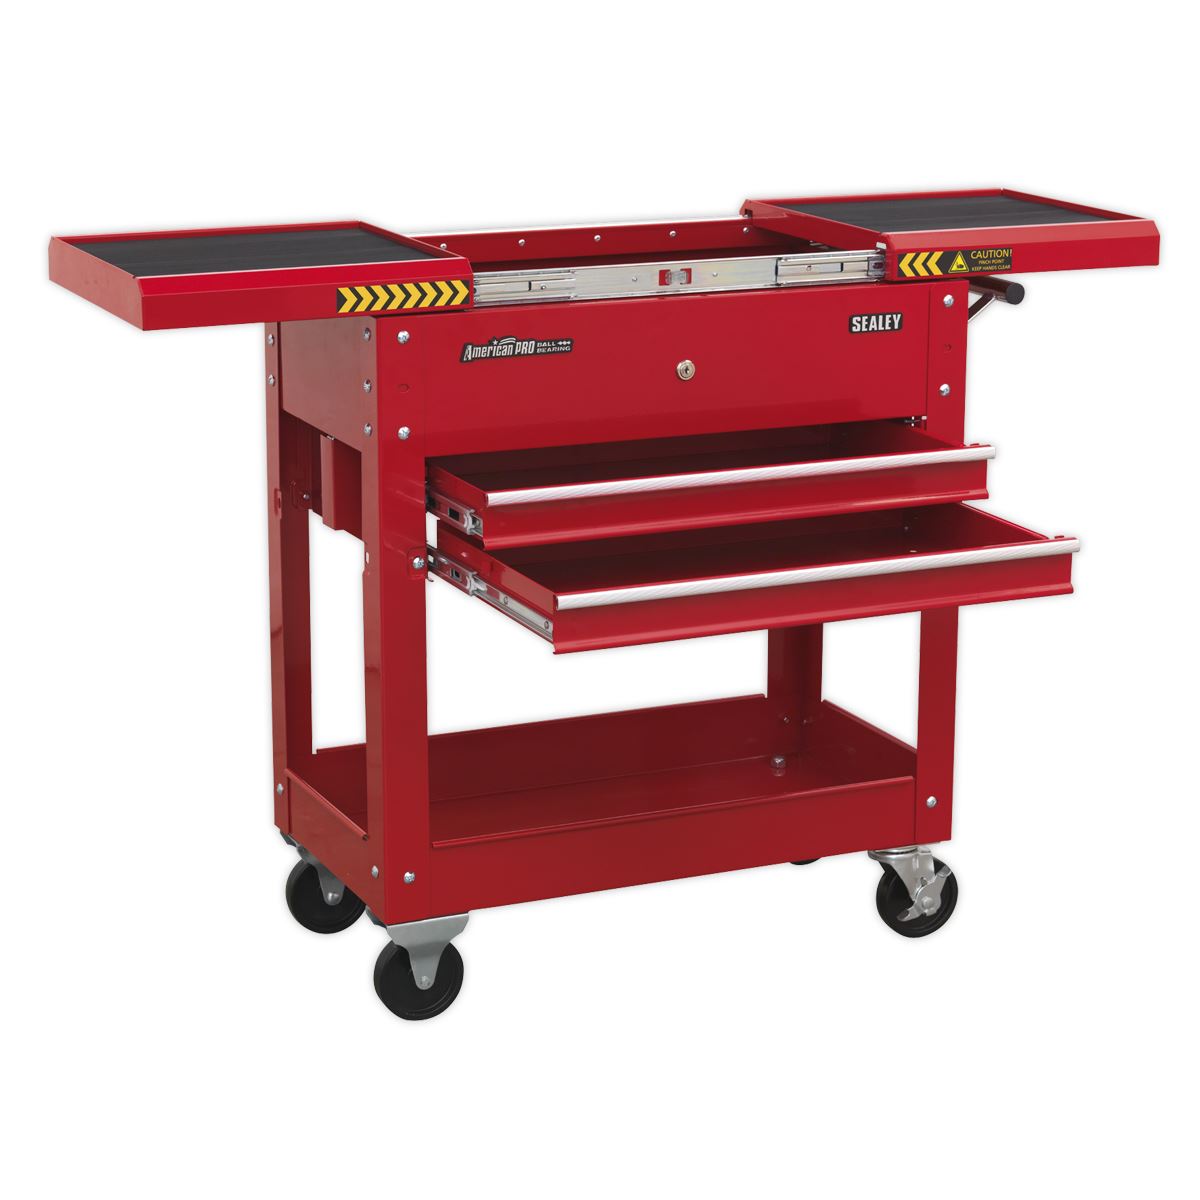 Sealey American Pro Mobile Tool & Parts Trolley - Red